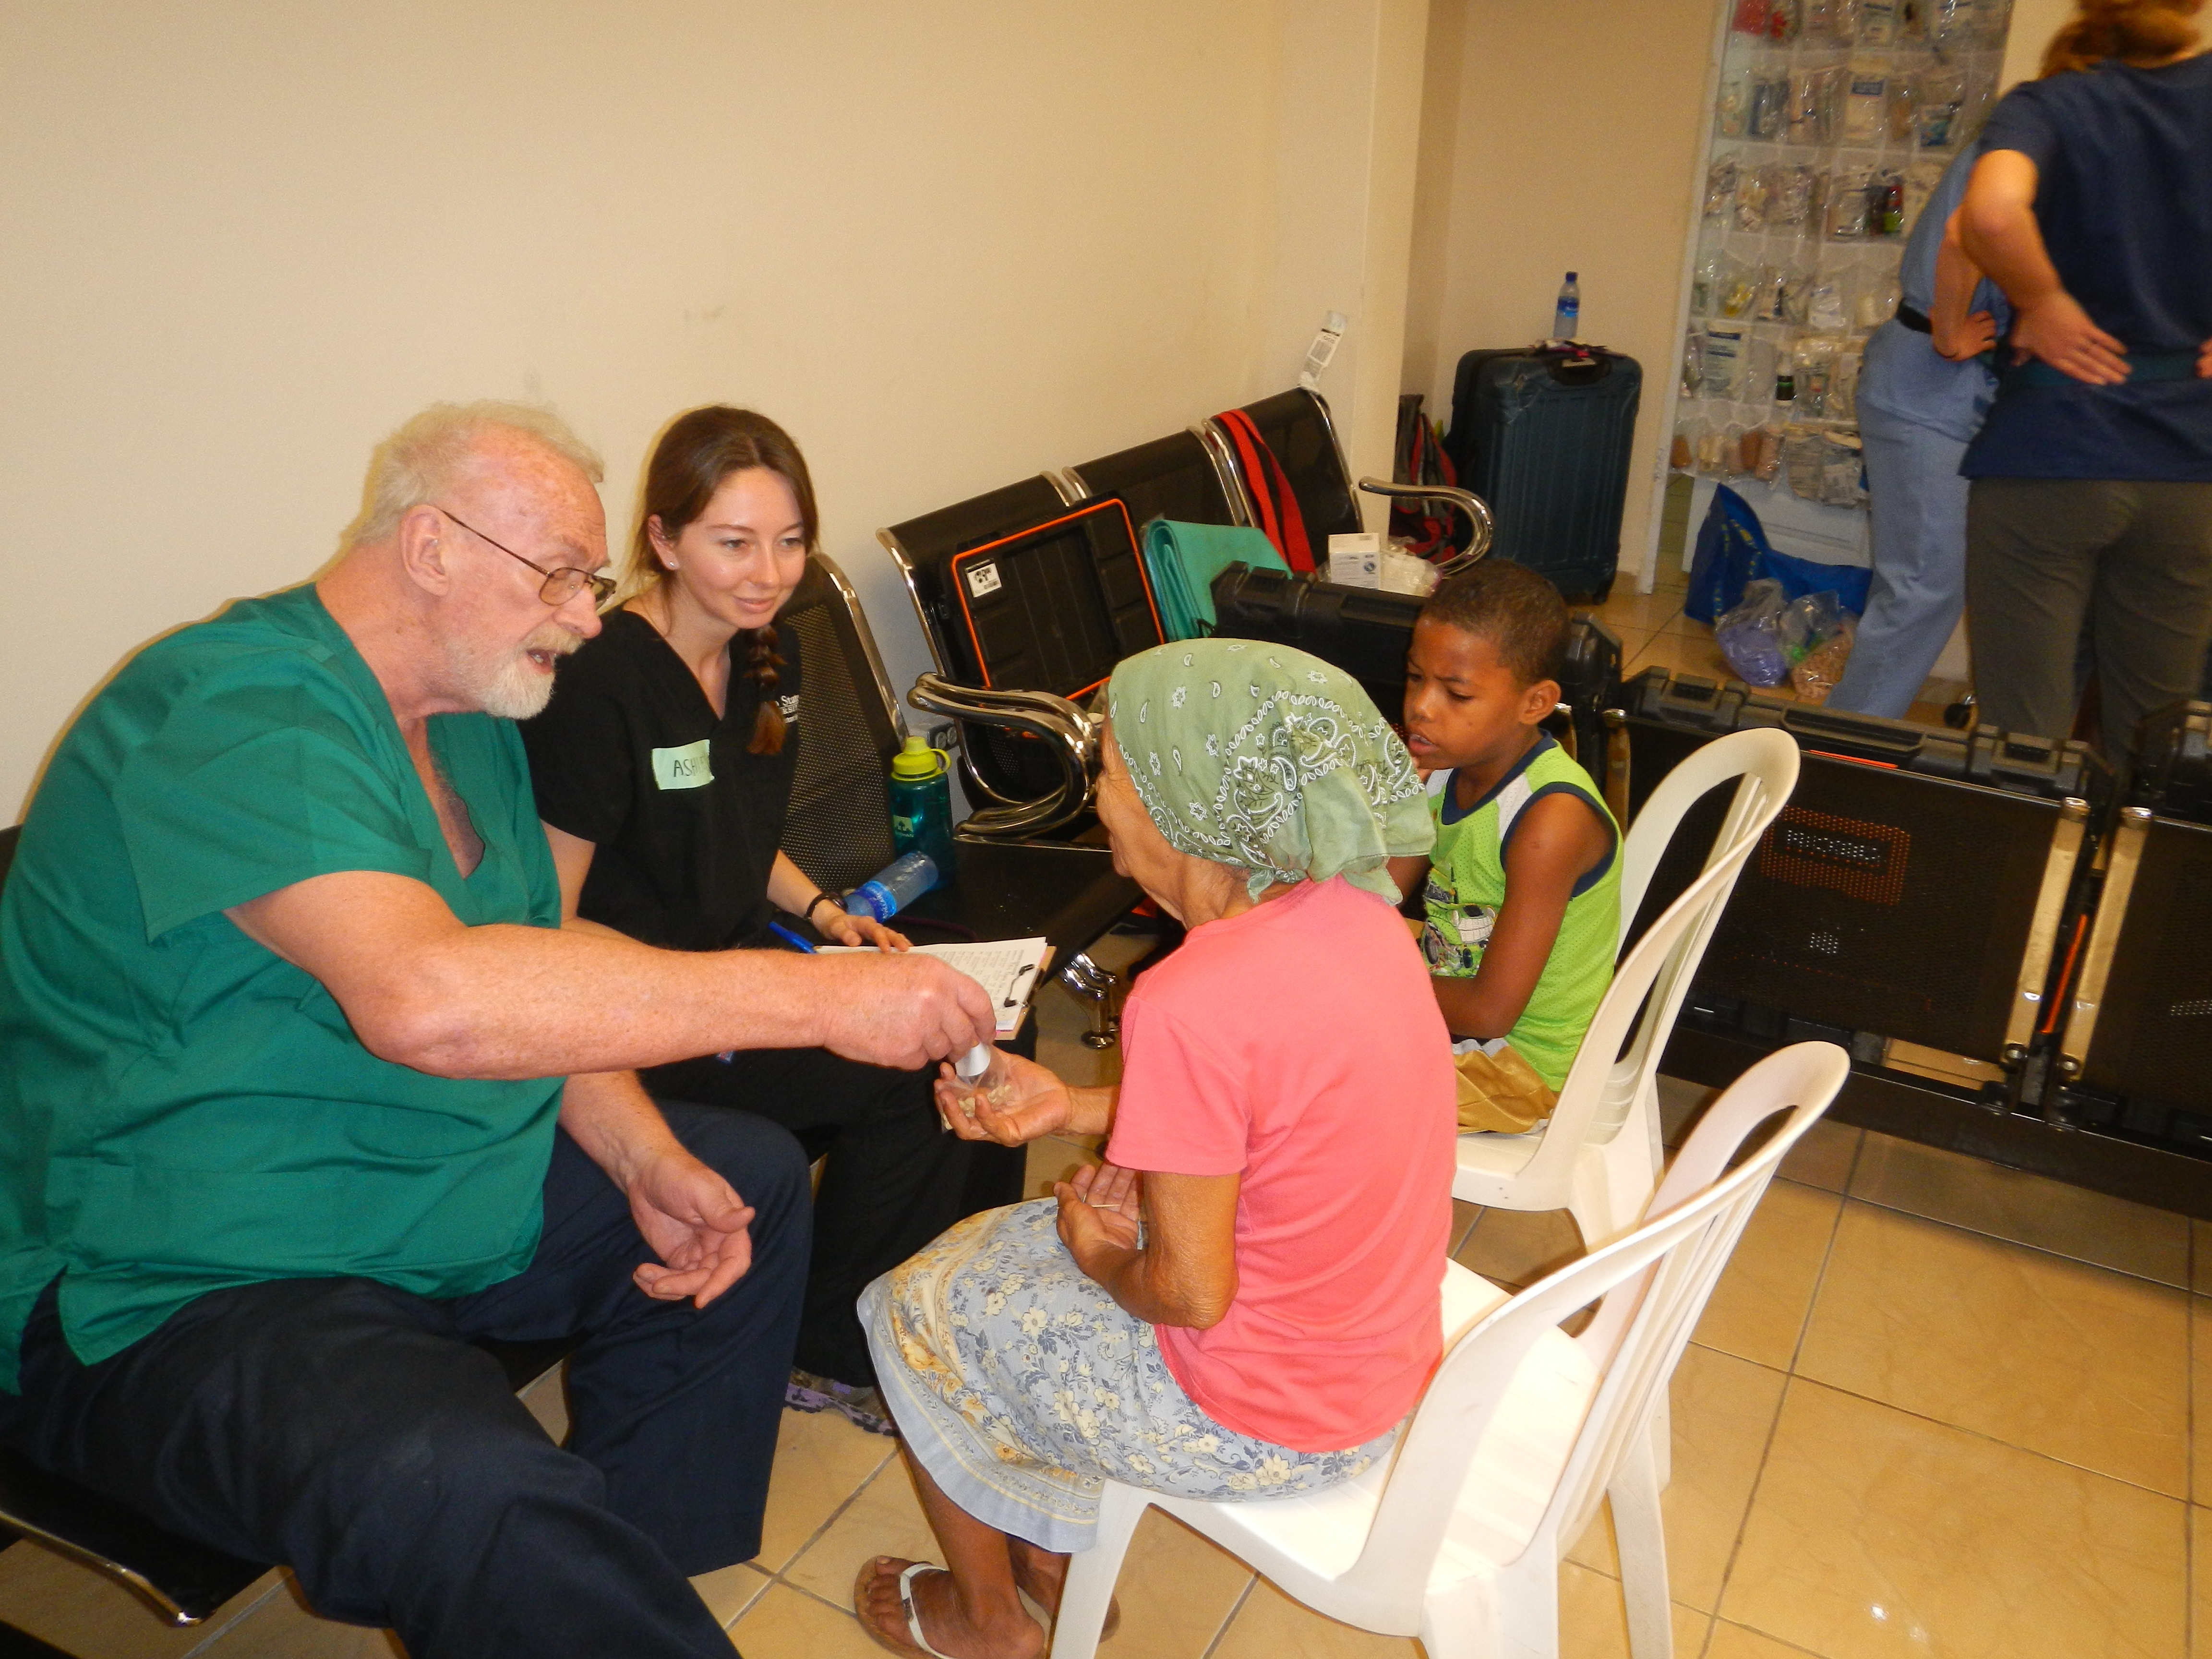 Student and faculty help a patient in the Dominican Republic